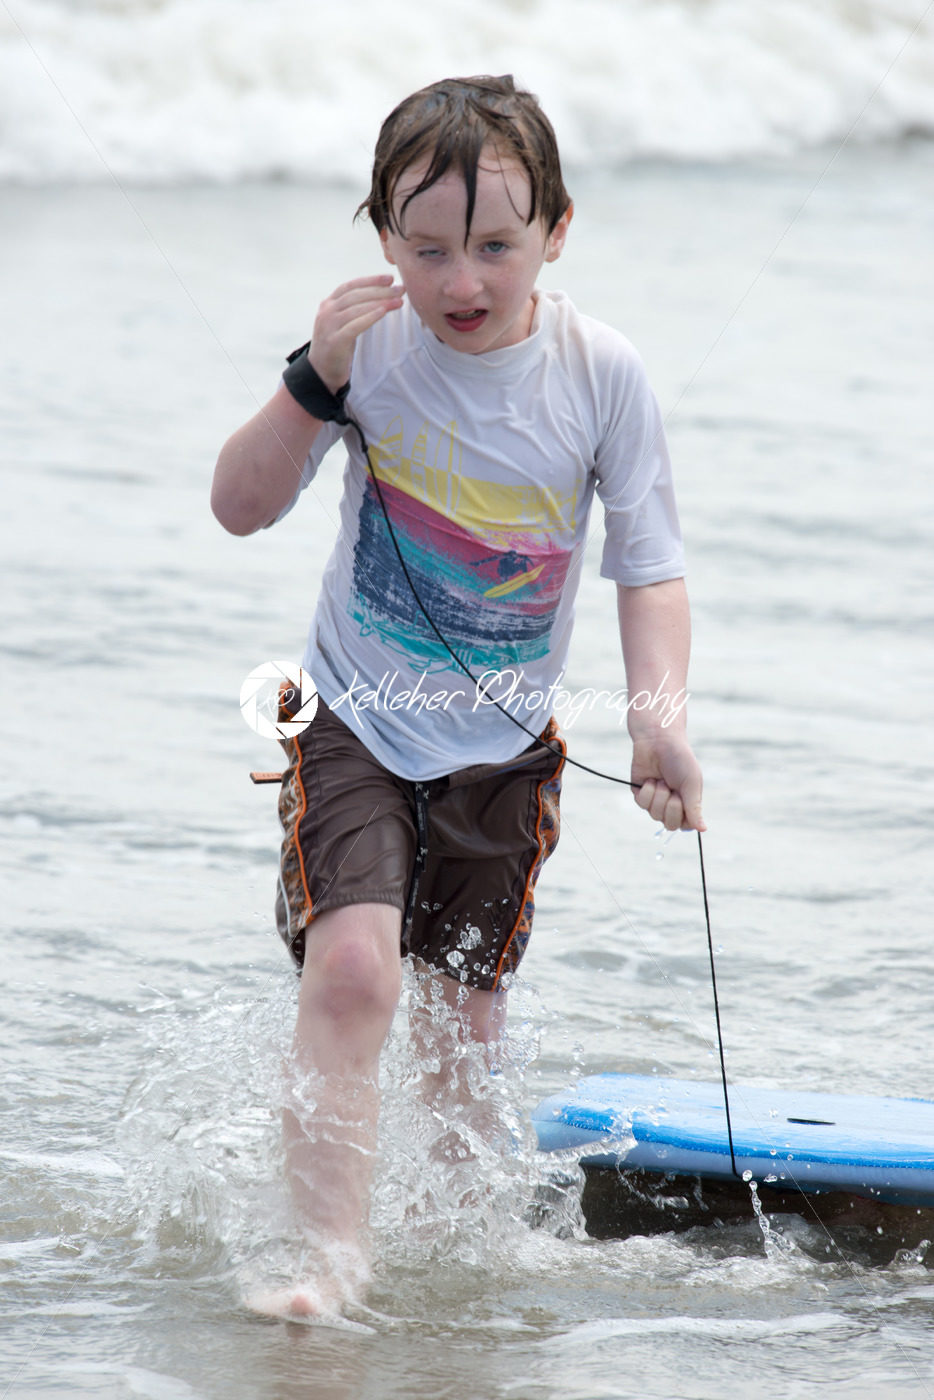 Boy coming out of the ocean waves with a boogy board - Kelleher Photography Store